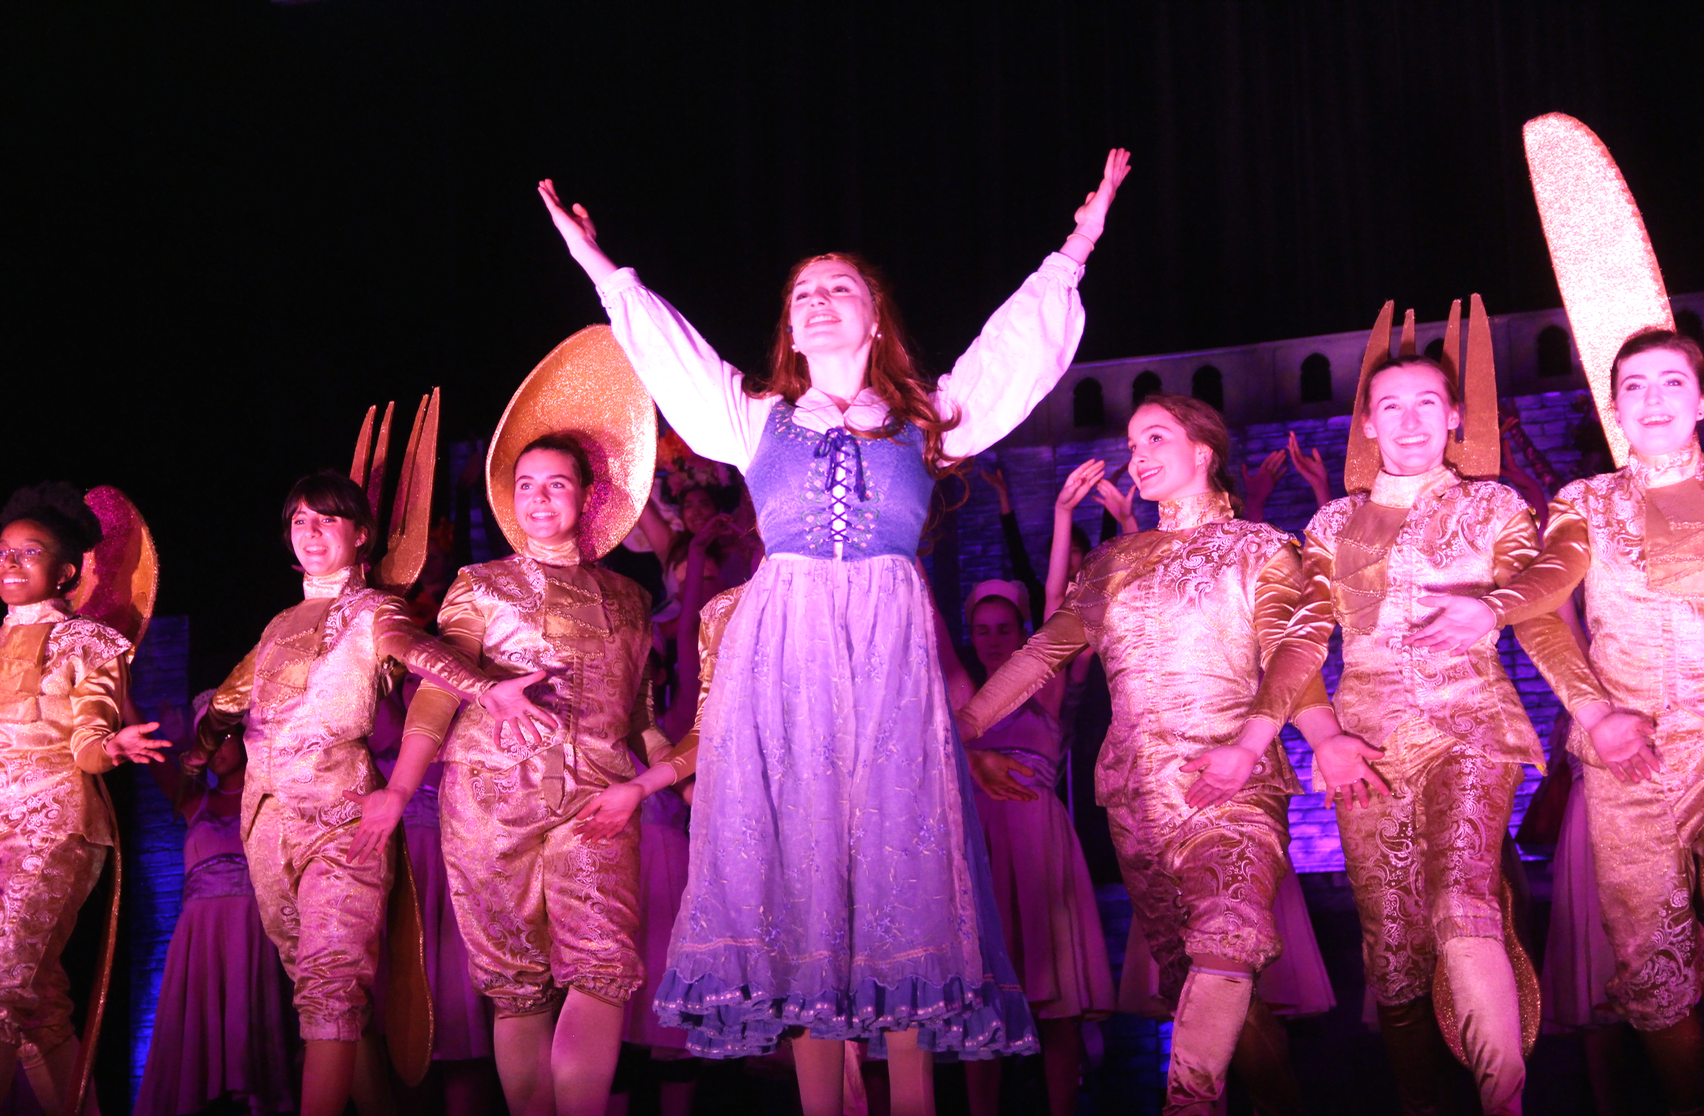 Dress rehearsal of Greenwich High School's production of Beauty & the Beast, May 13, 2019 Photo: Leslie Yager